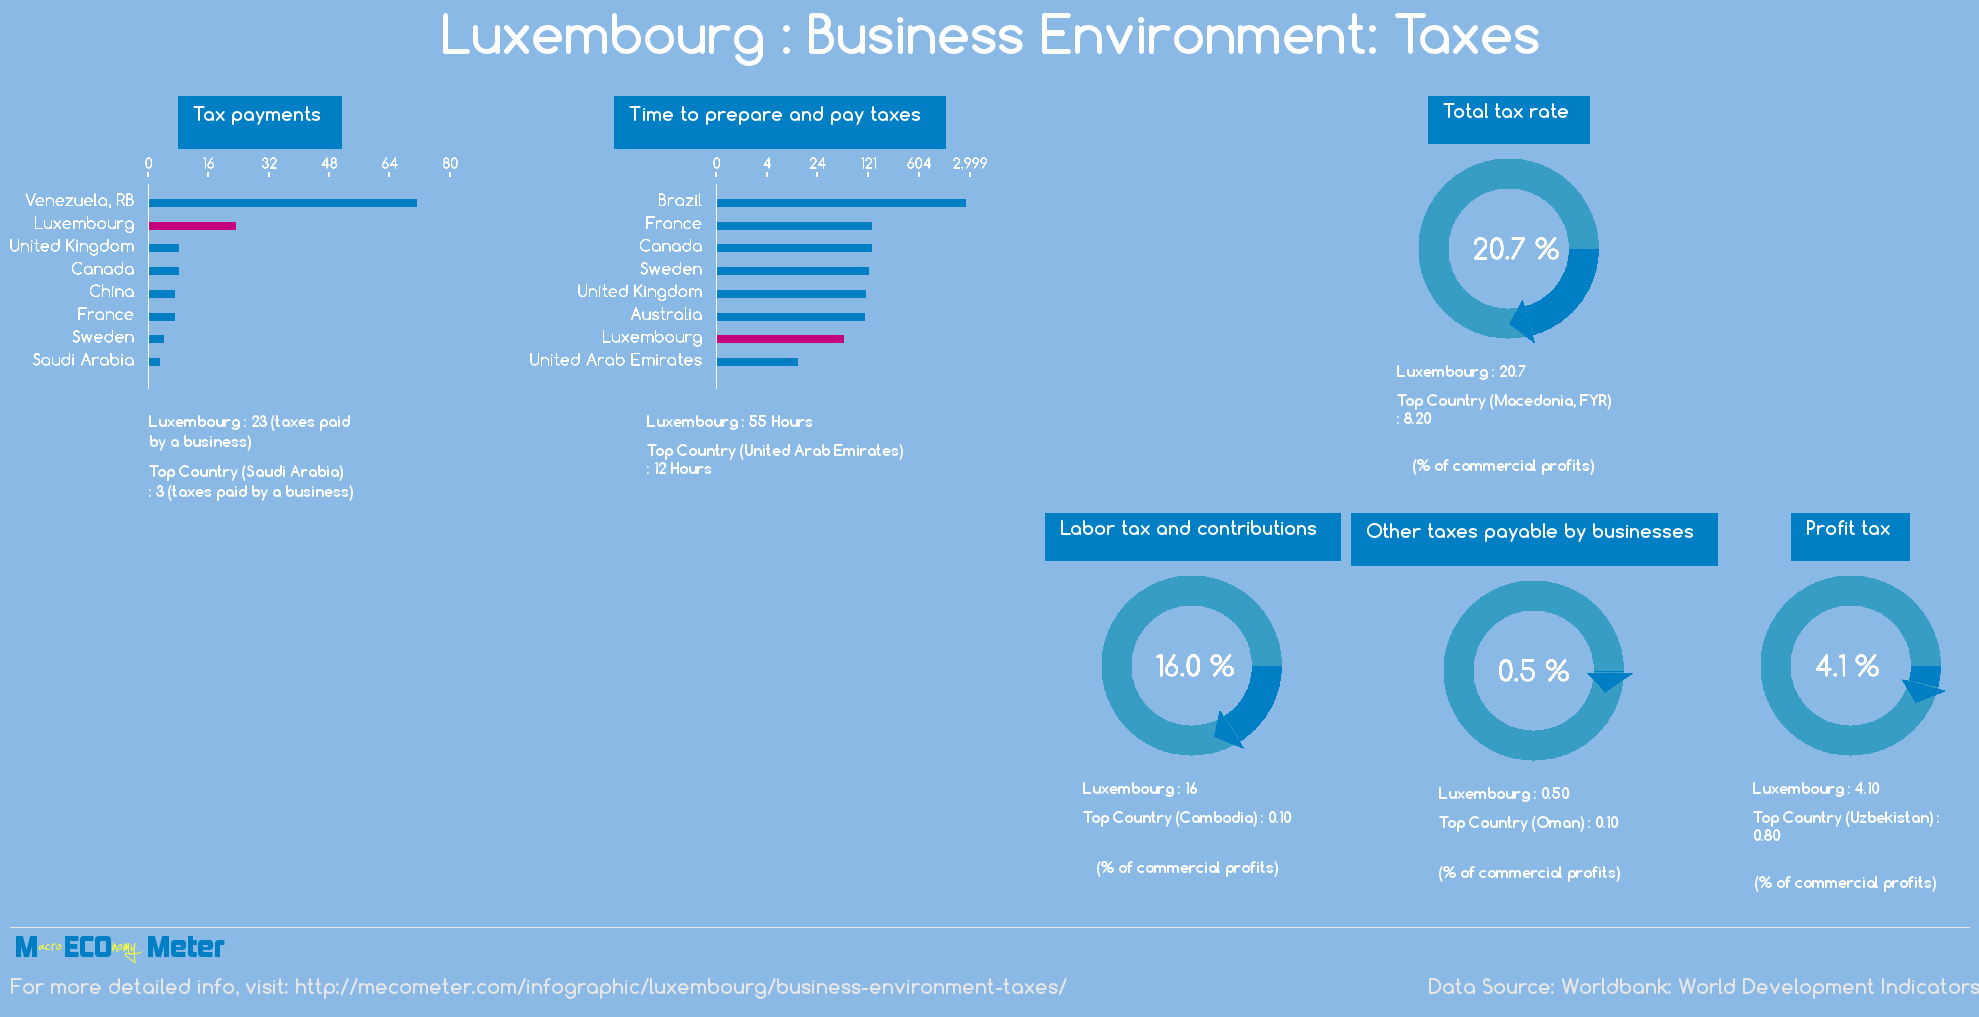 Luxembourg : Business Environment: Taxes